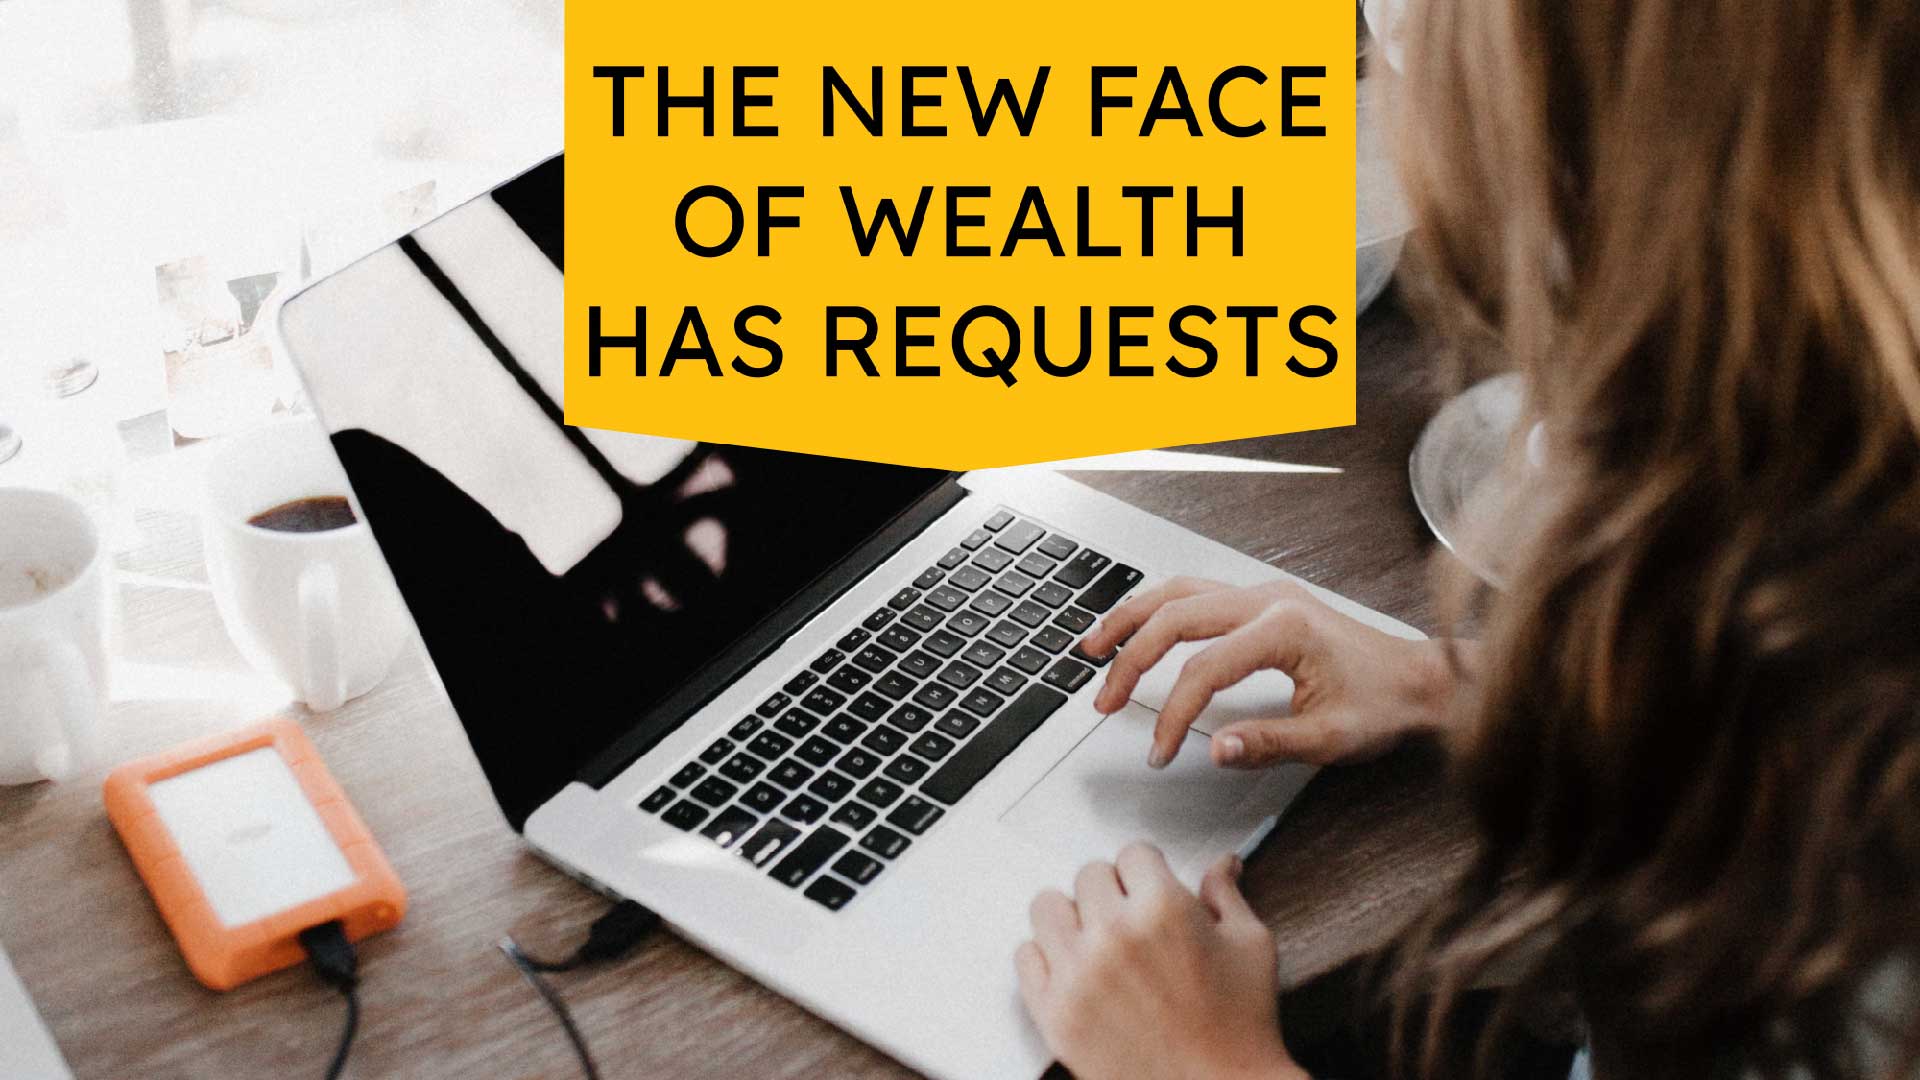 The New Face of Wealth Has Requests